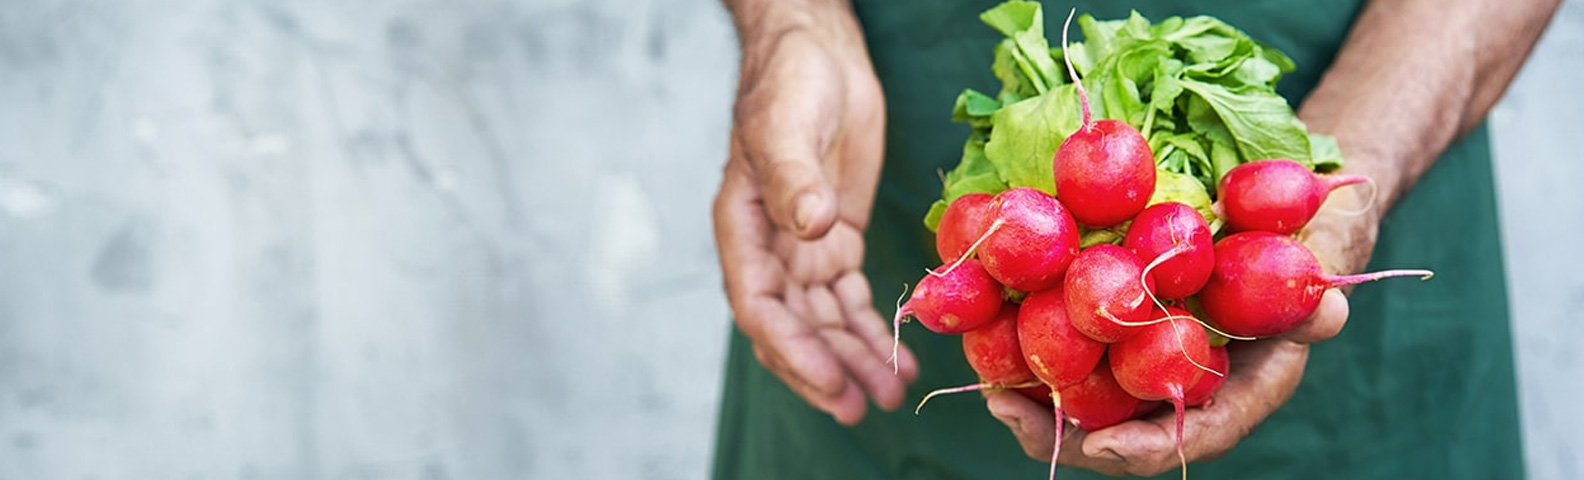 Healthy, sustainably grown radishes